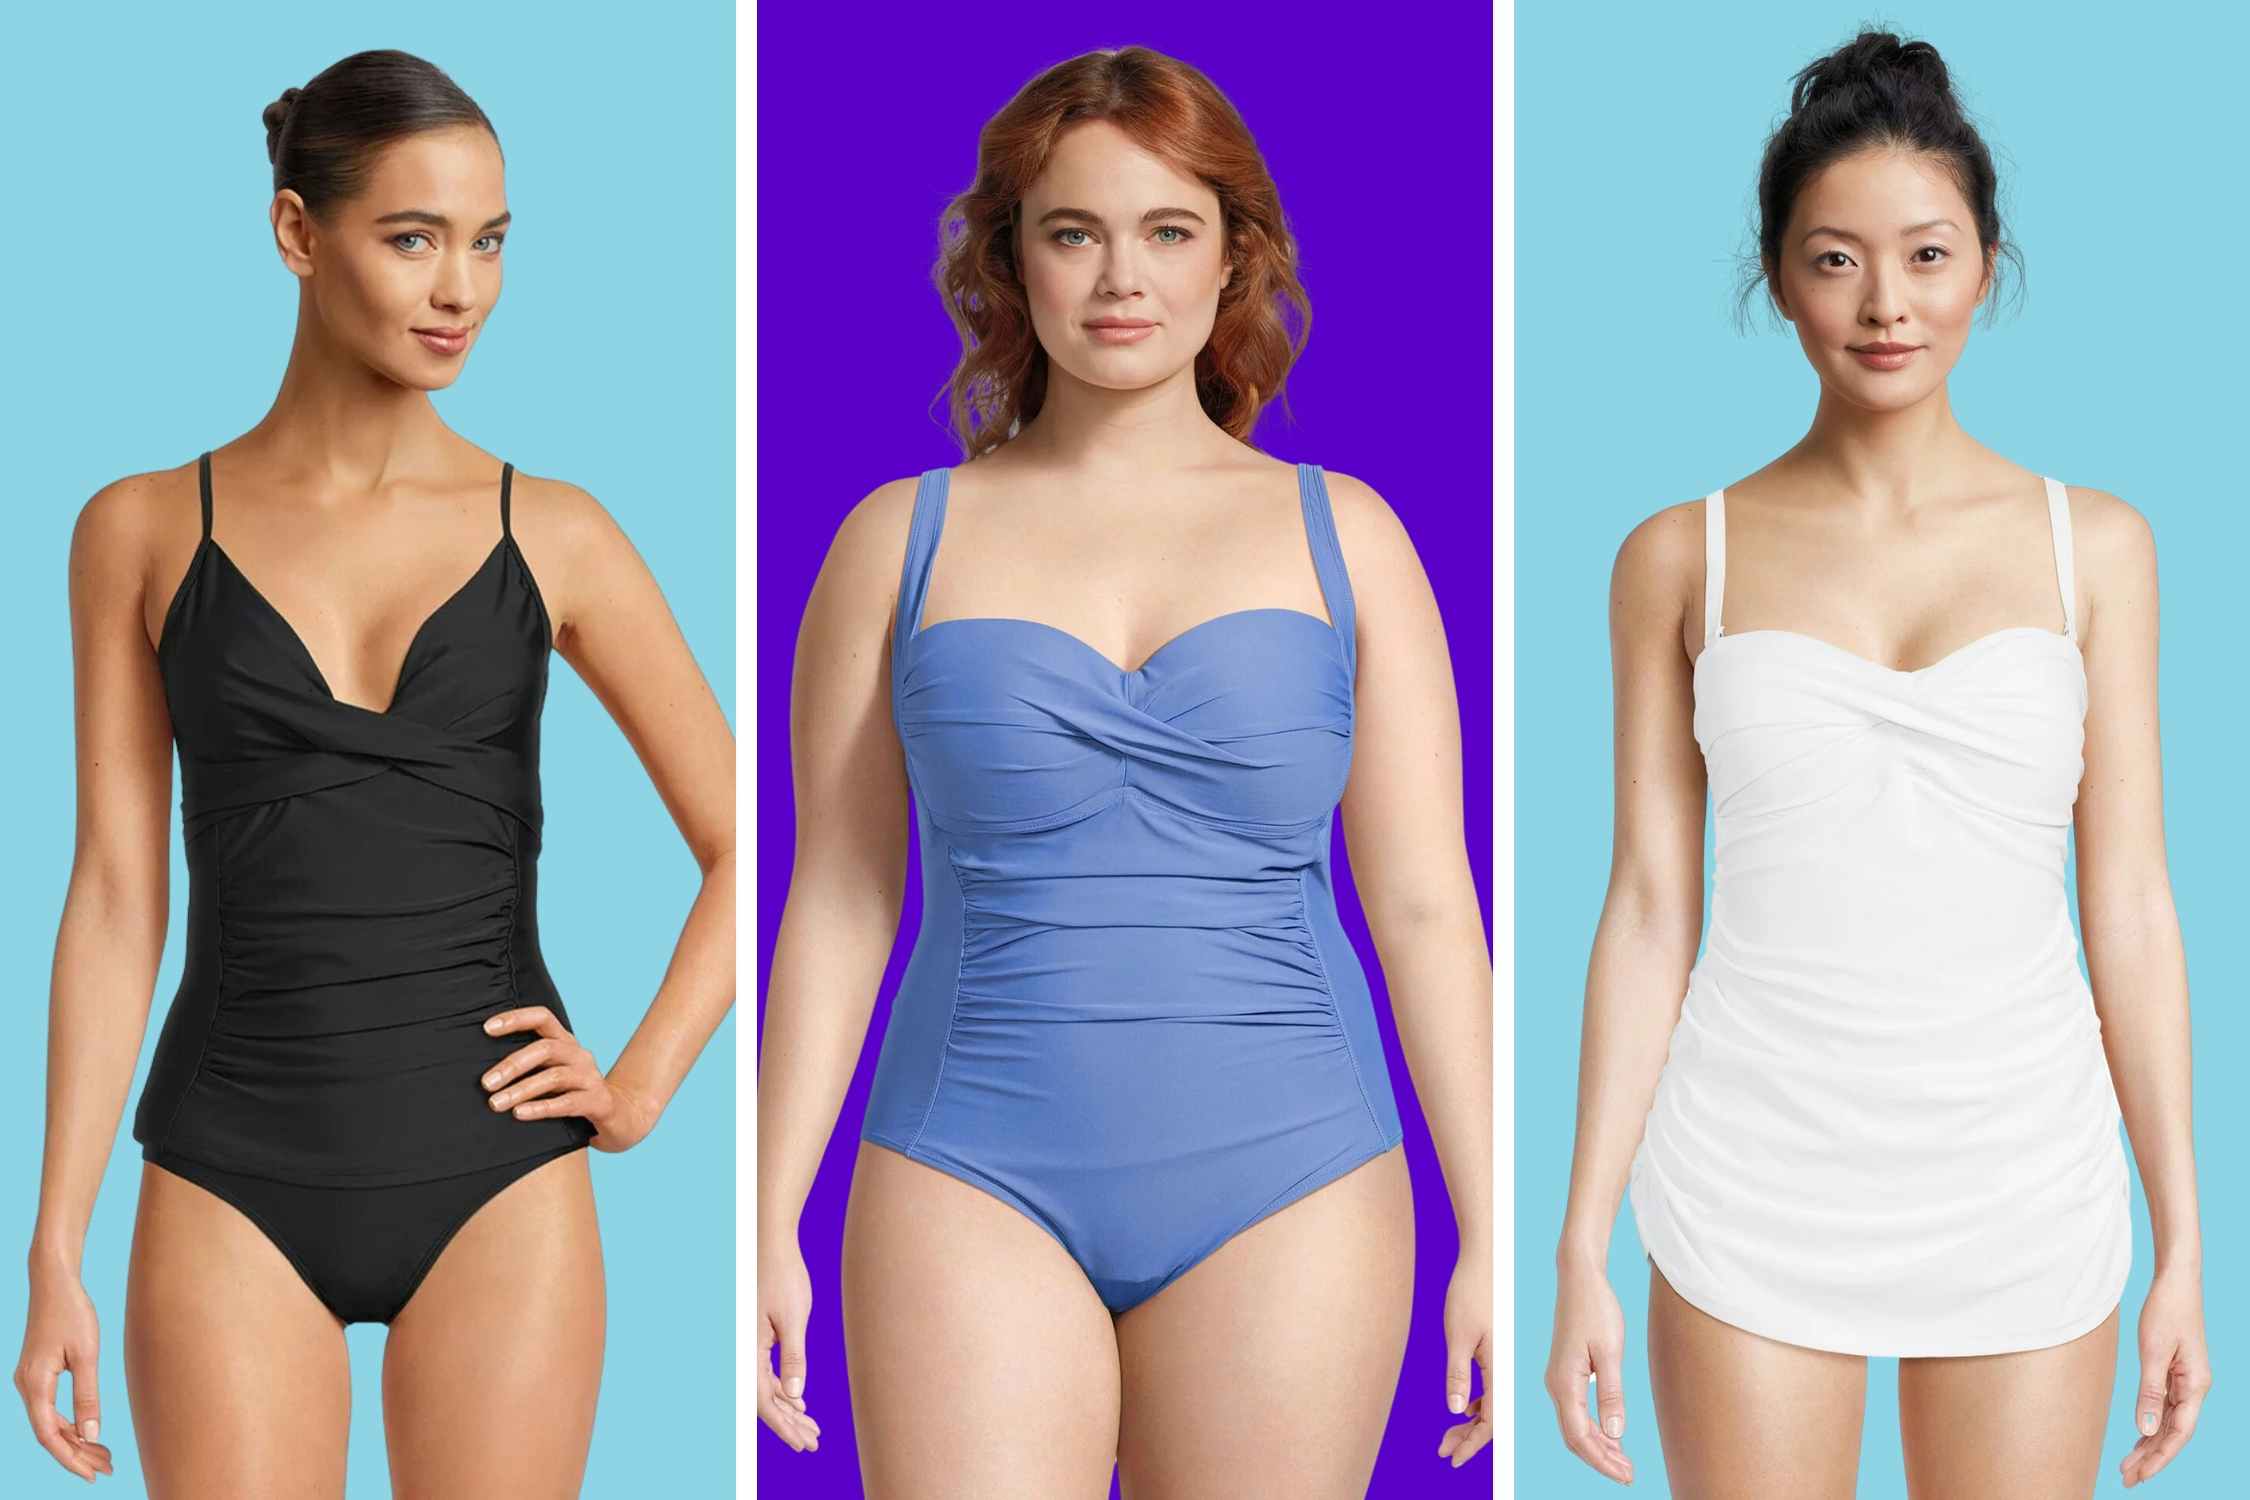 Women's Swimwear at Walmart: Prices Start at $5 (Plus Sizes Included)